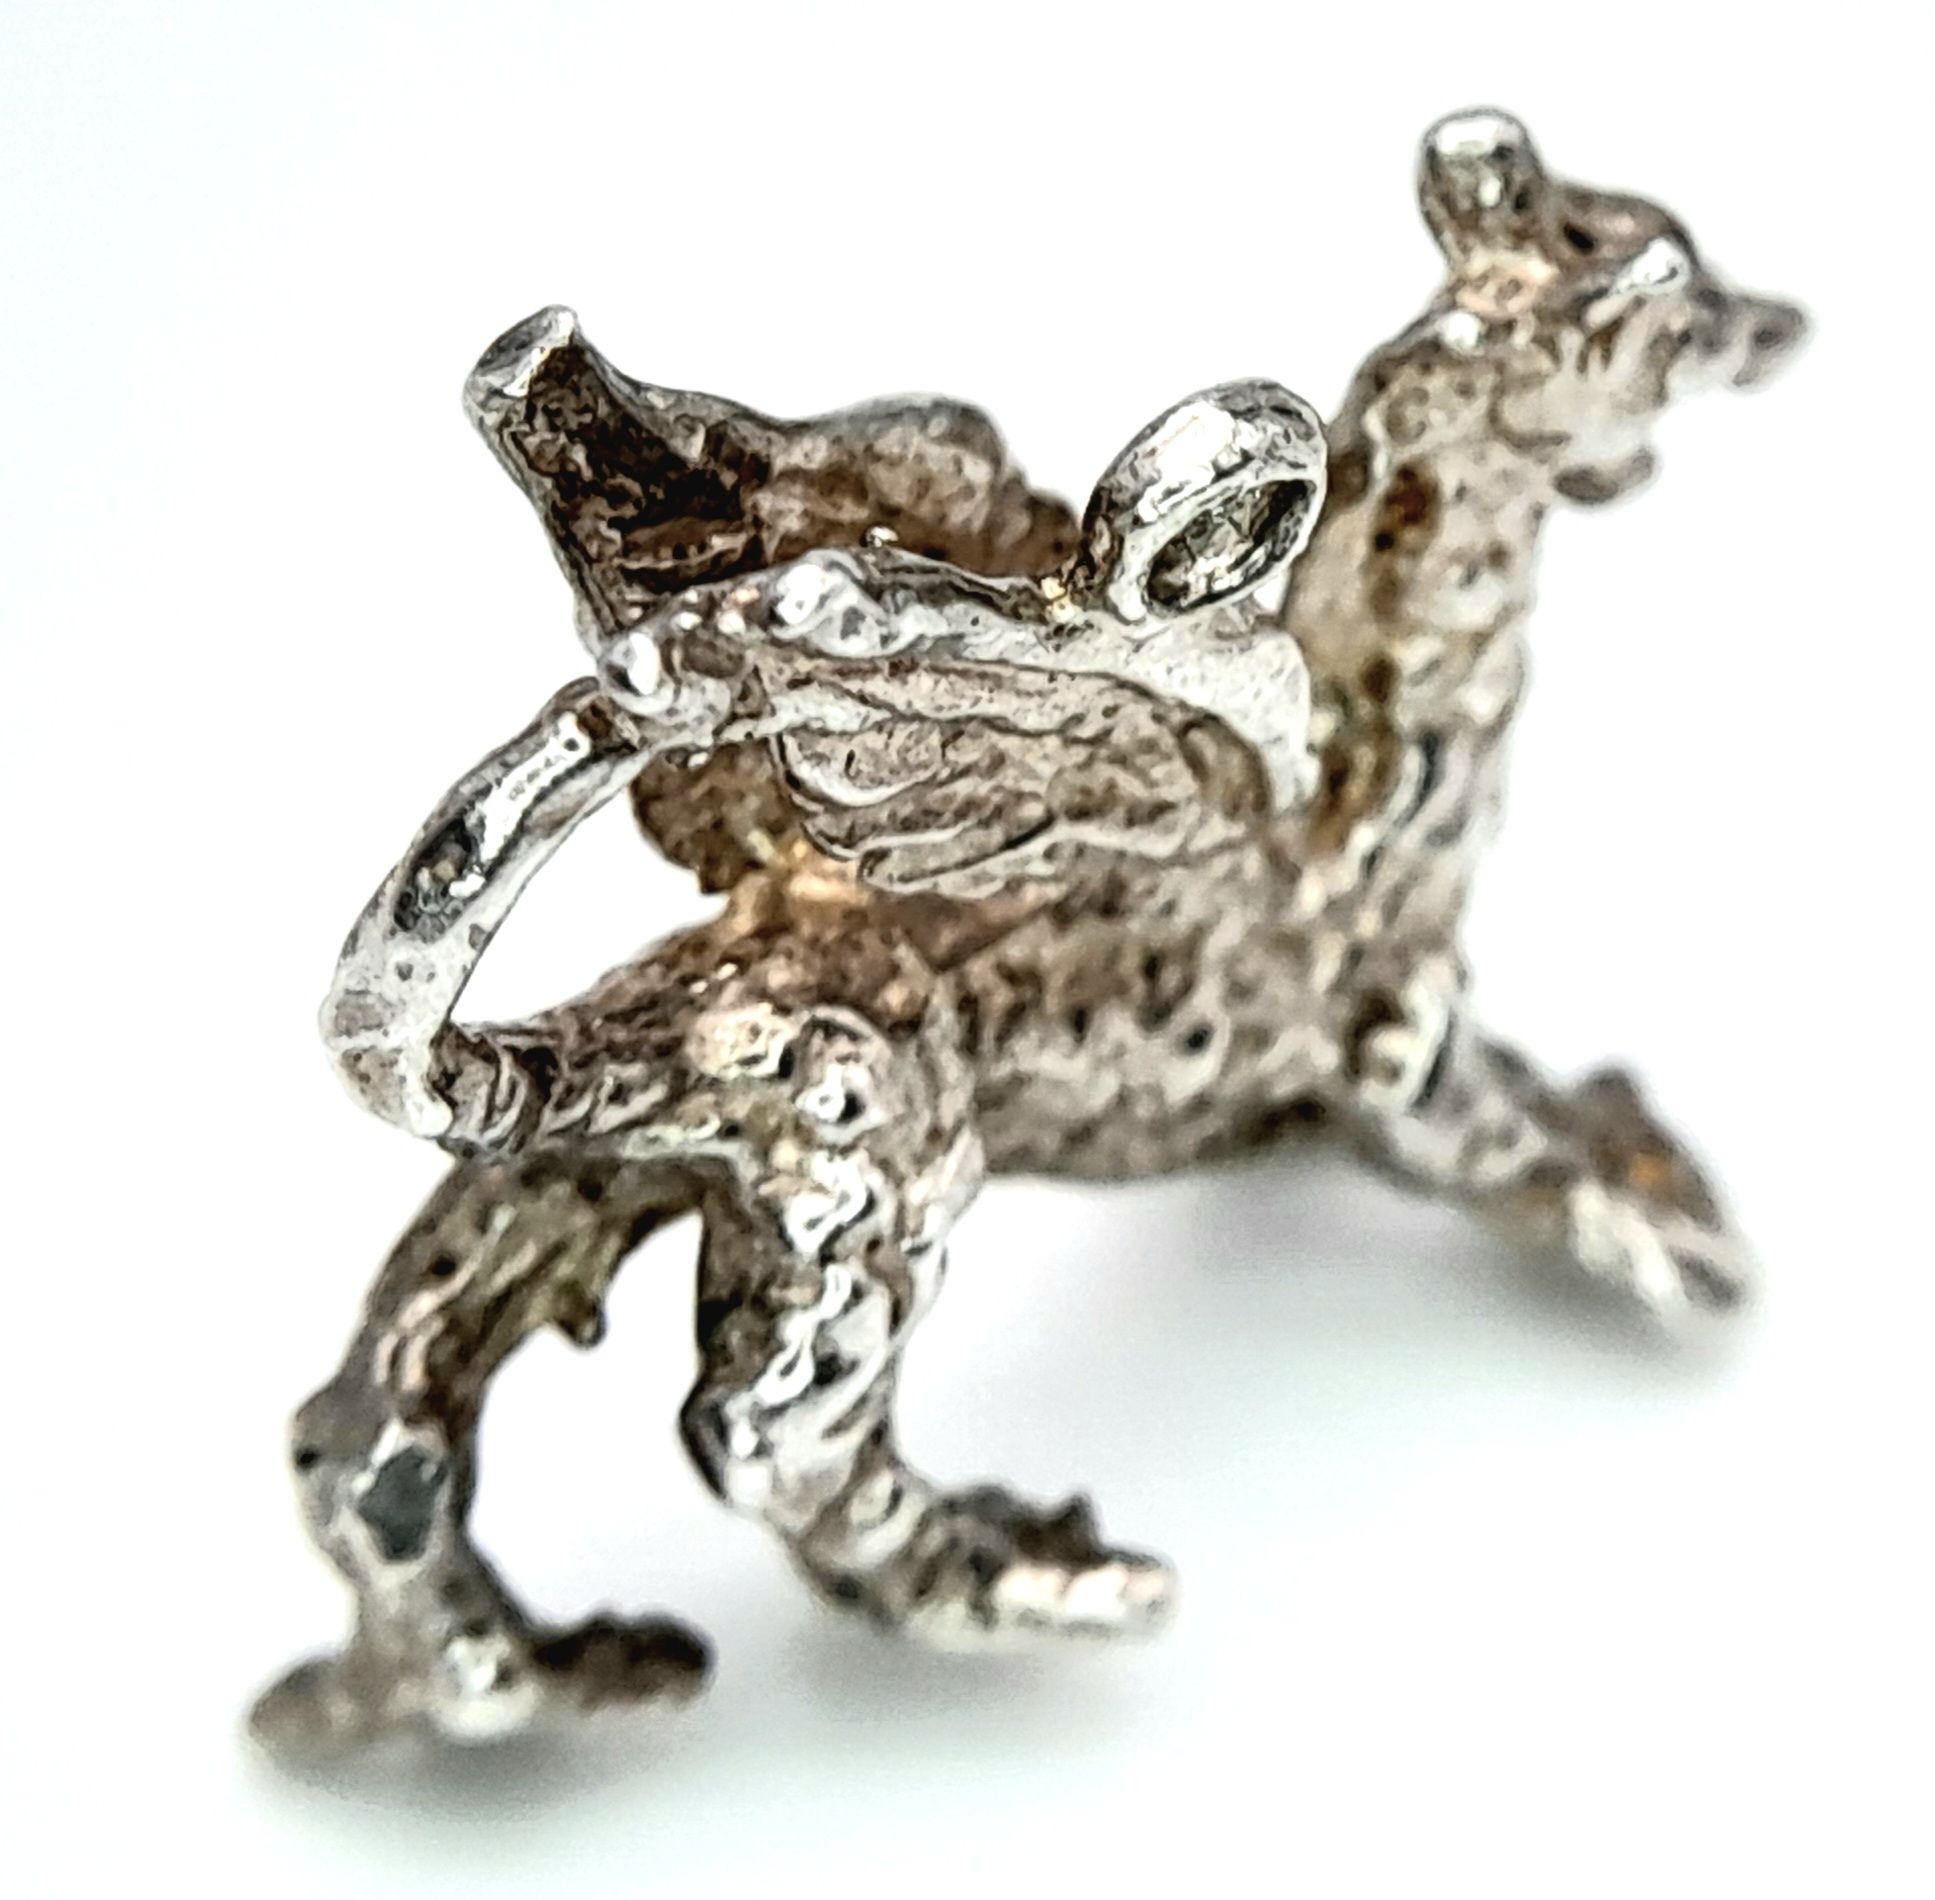 A STERLING SILVER WELSH DRAGON CHARM. 2.3cm x 1.6cm, 3.2g weight. Ref: SC 8106 - Image 2 of 5